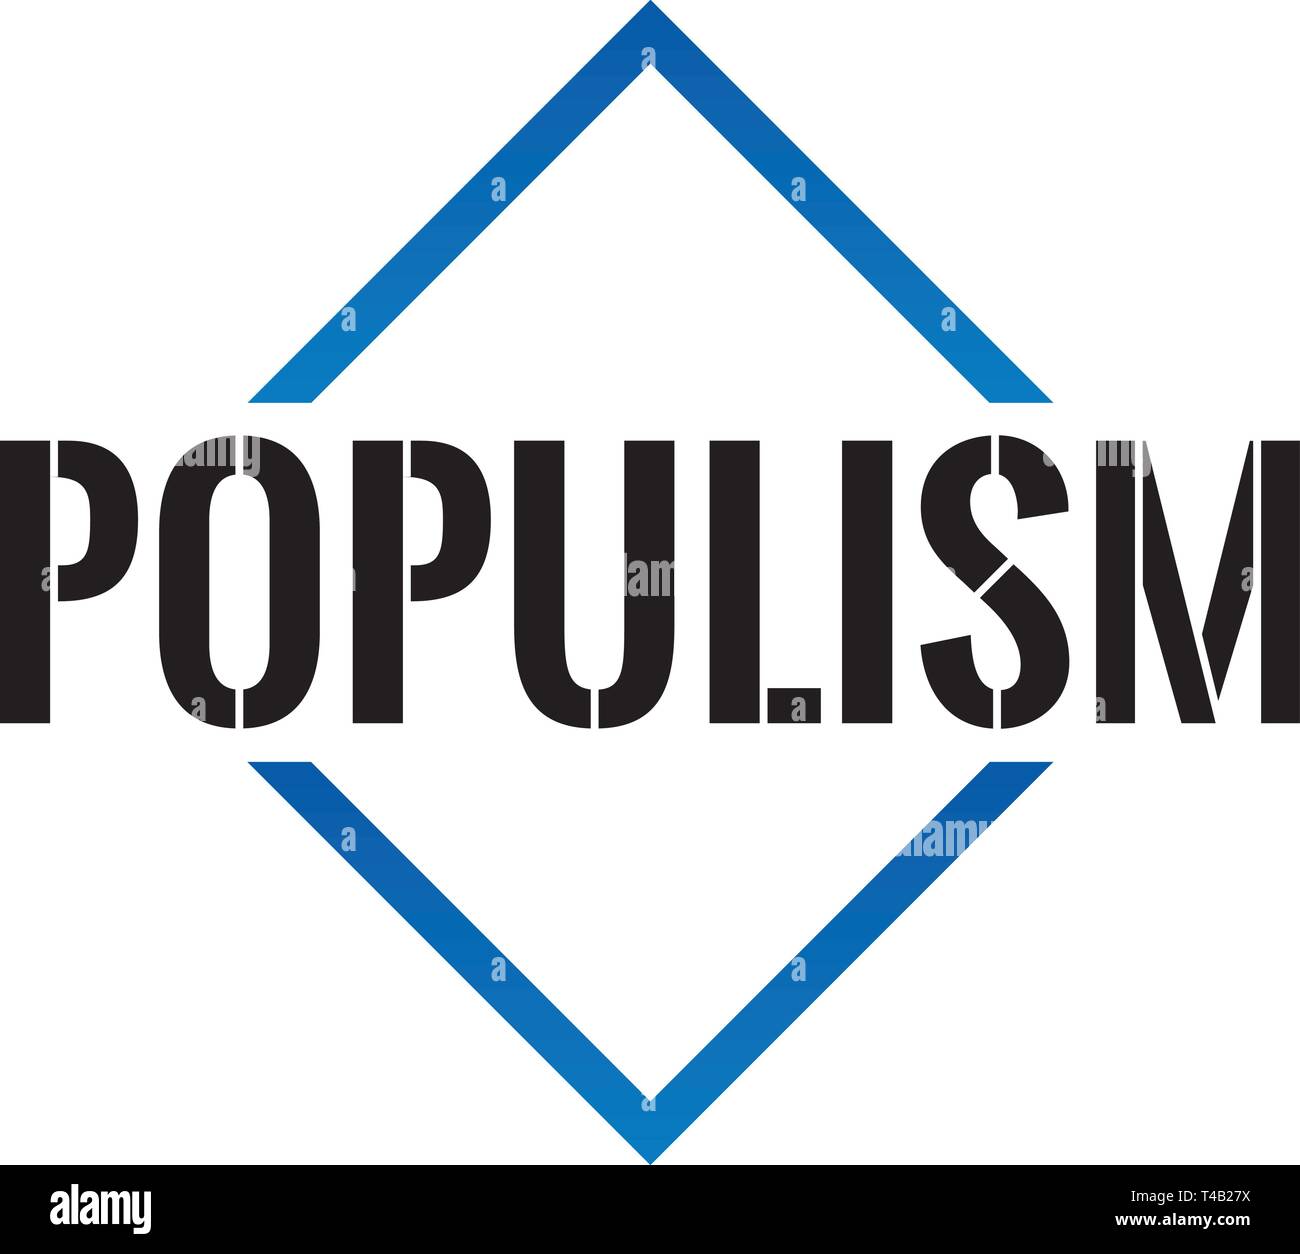 Triangle or pyramid populism line art vector icon Stock Vector